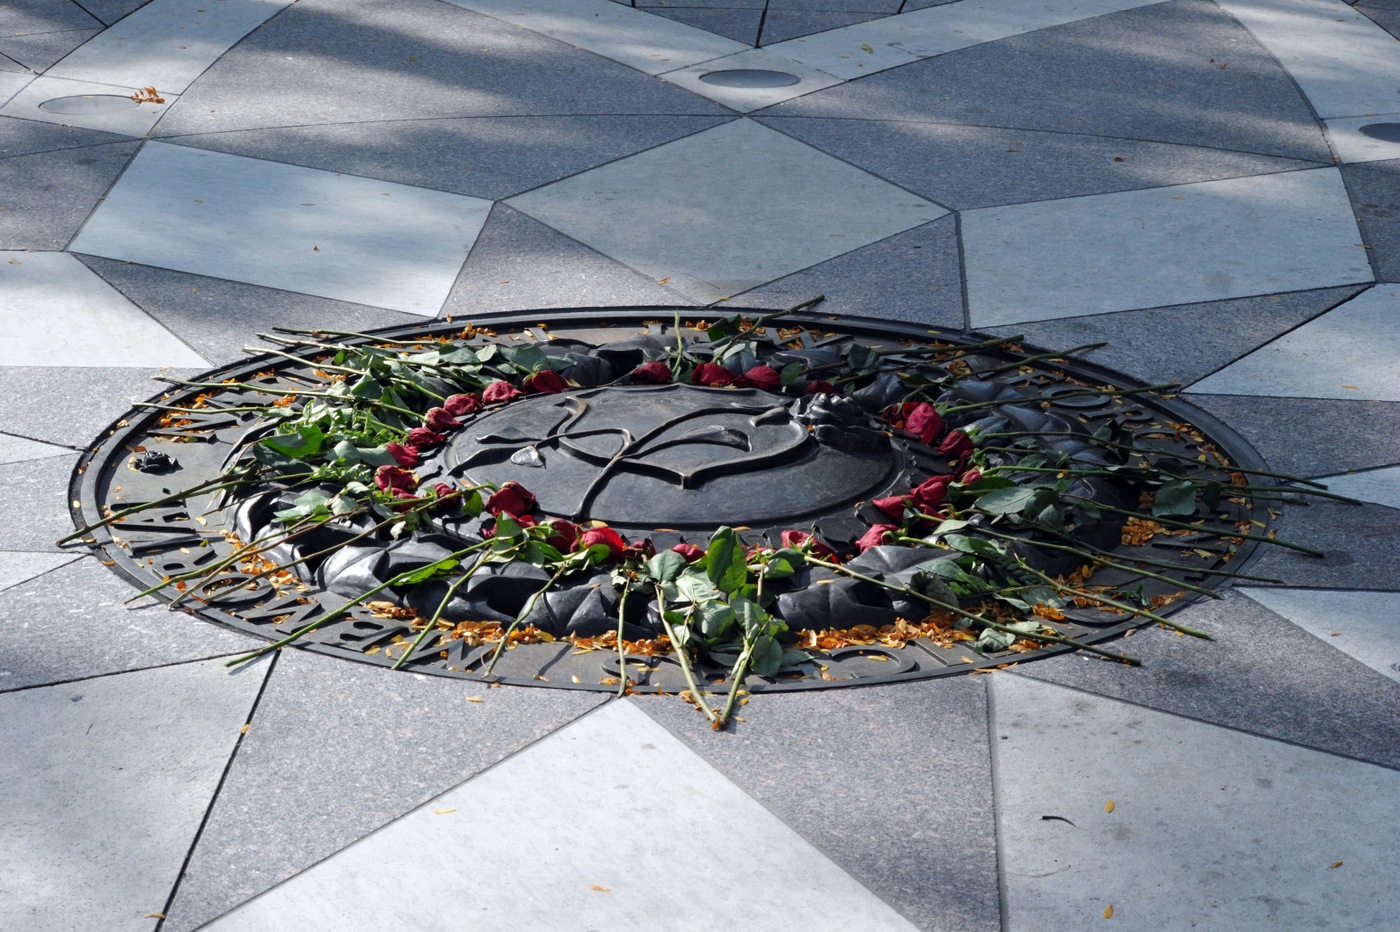 Flowers laid on a seal at the National Law Enforcement Officers Memorial during National Police Week in Washington, D.C. on October 14, 2021.